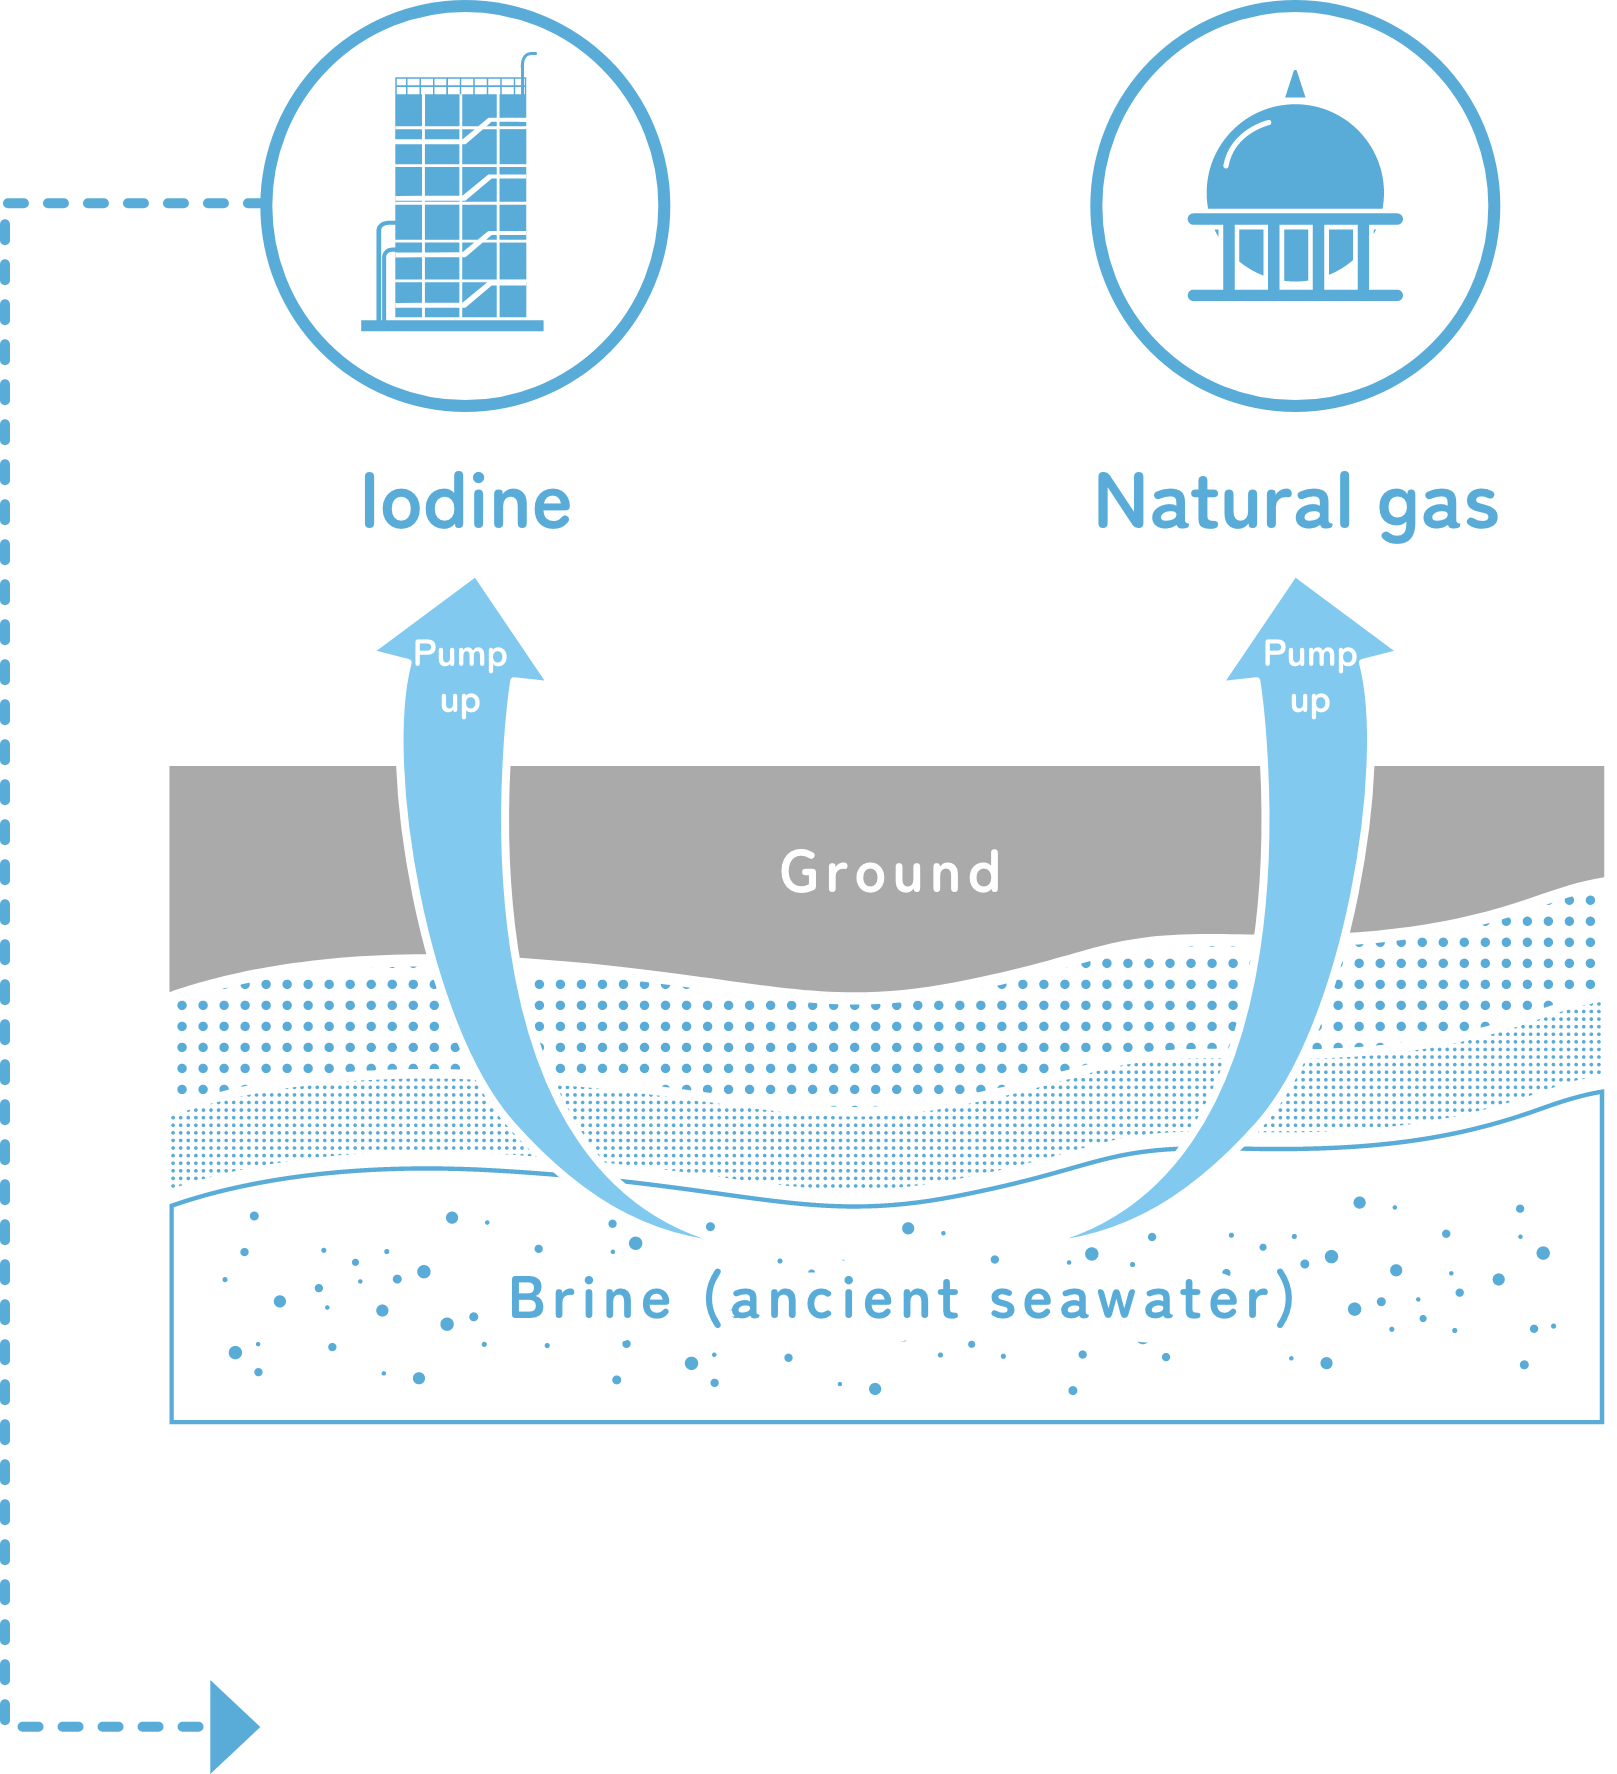 Iodine and Natural gas